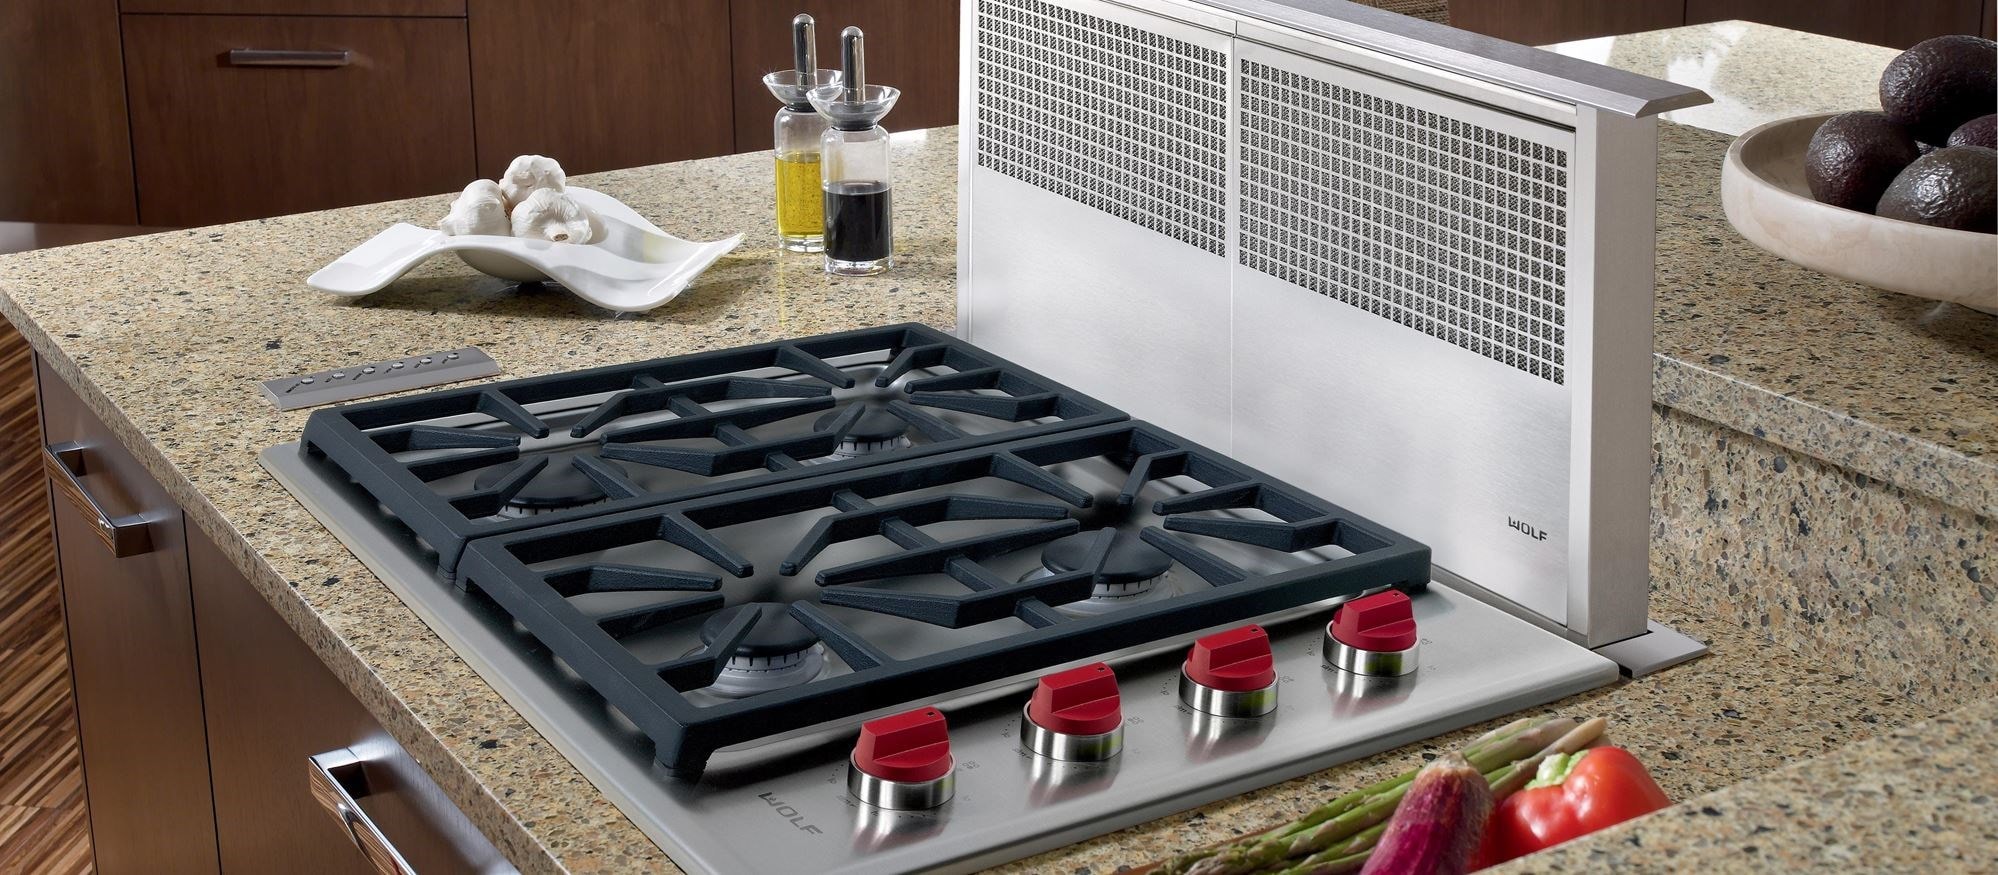 Forno Spezia 30-Inch Gas Cooktop, 4 Burners, Wok Ring and Grill